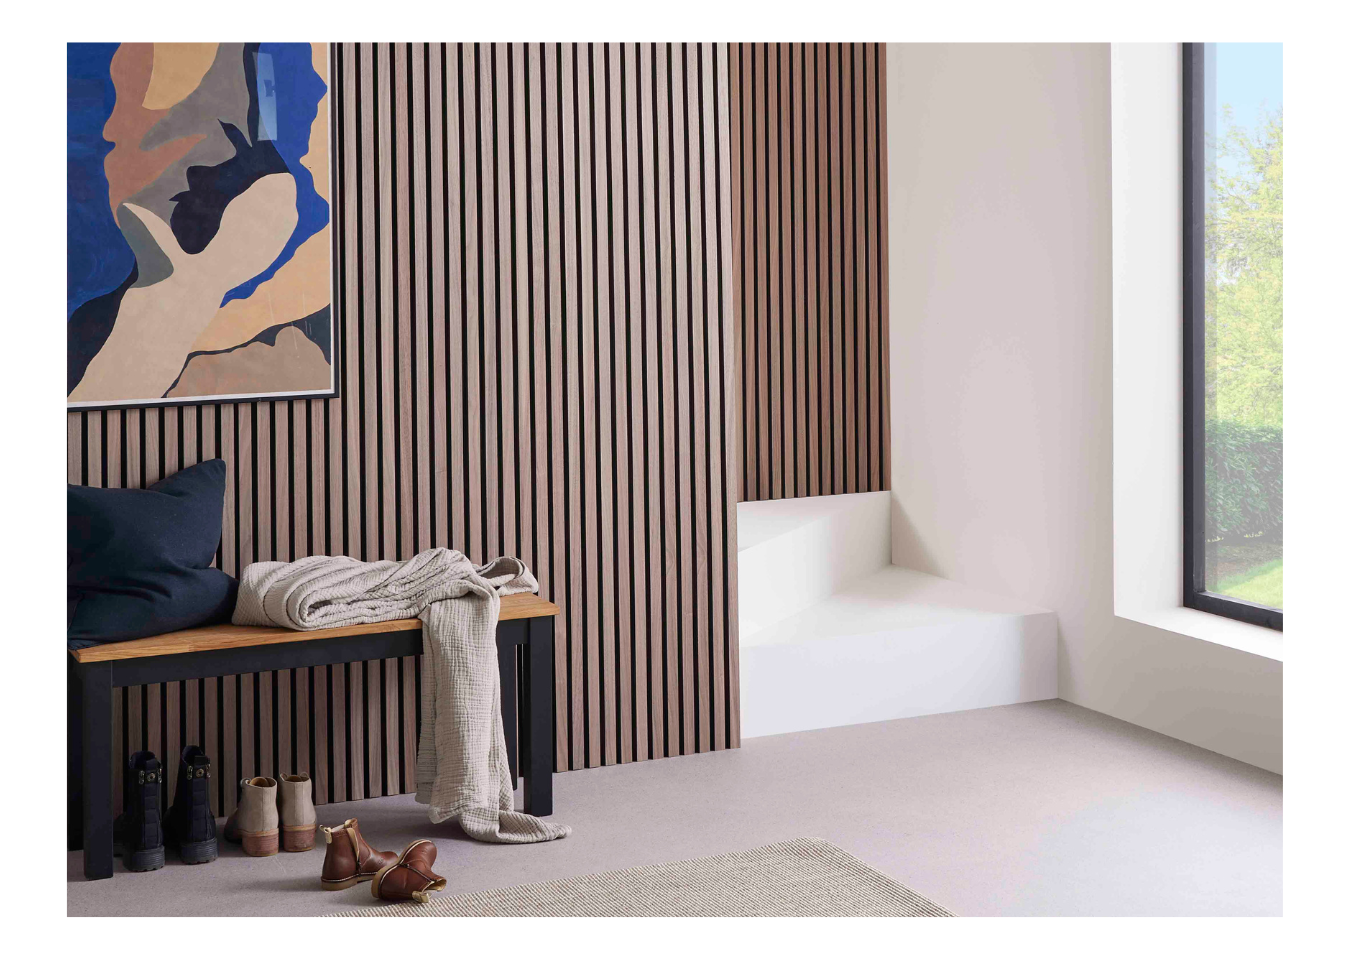 SlatWall Walnut panels in a biophilic design hallway featuring blue and beige wall art and a cushion and blanket on a bench.